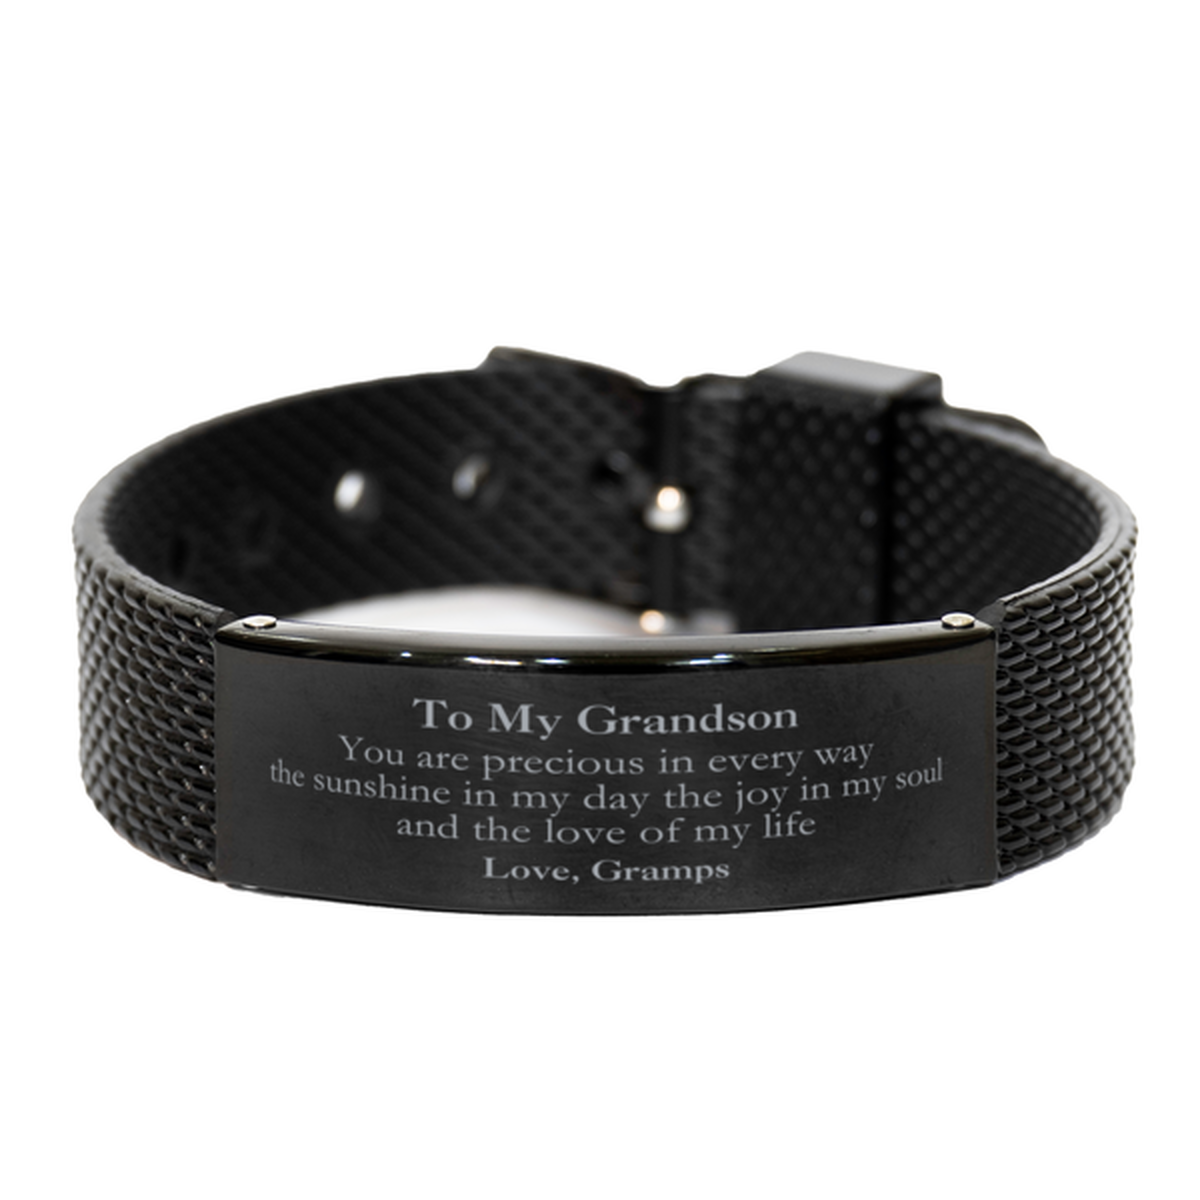 Graduation Gifts for Grandson Black Shark Mesh Bracelet Present from Gramps, Christmas Grandson Birthday Gifts Grandson You are precious in every way the sunshine in my day. Love, Gramps